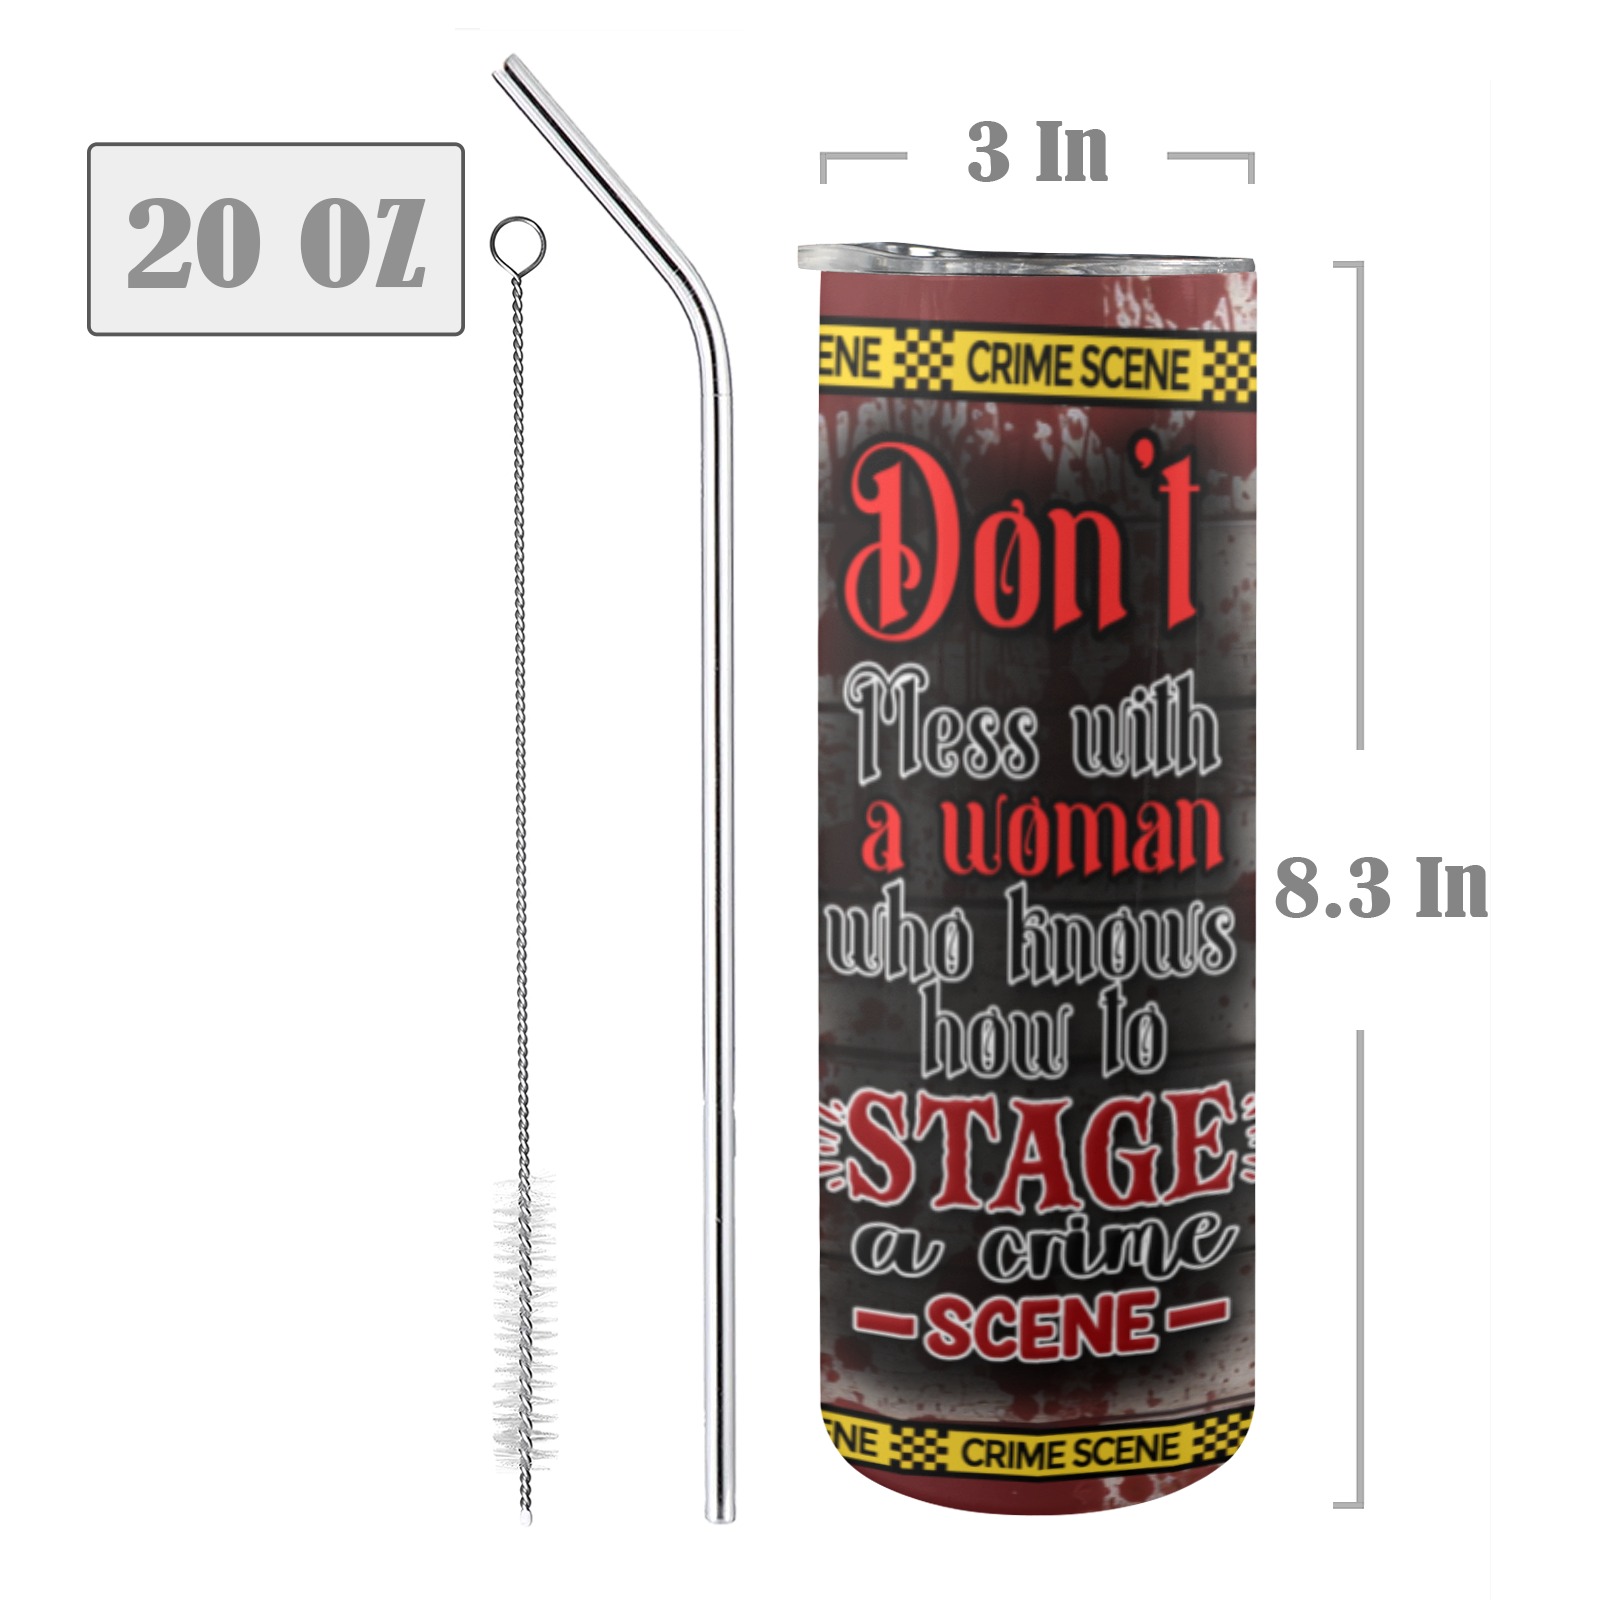 Don't Mess With A Women 20oz Tall Skinny Tumbler with Lid and Straw